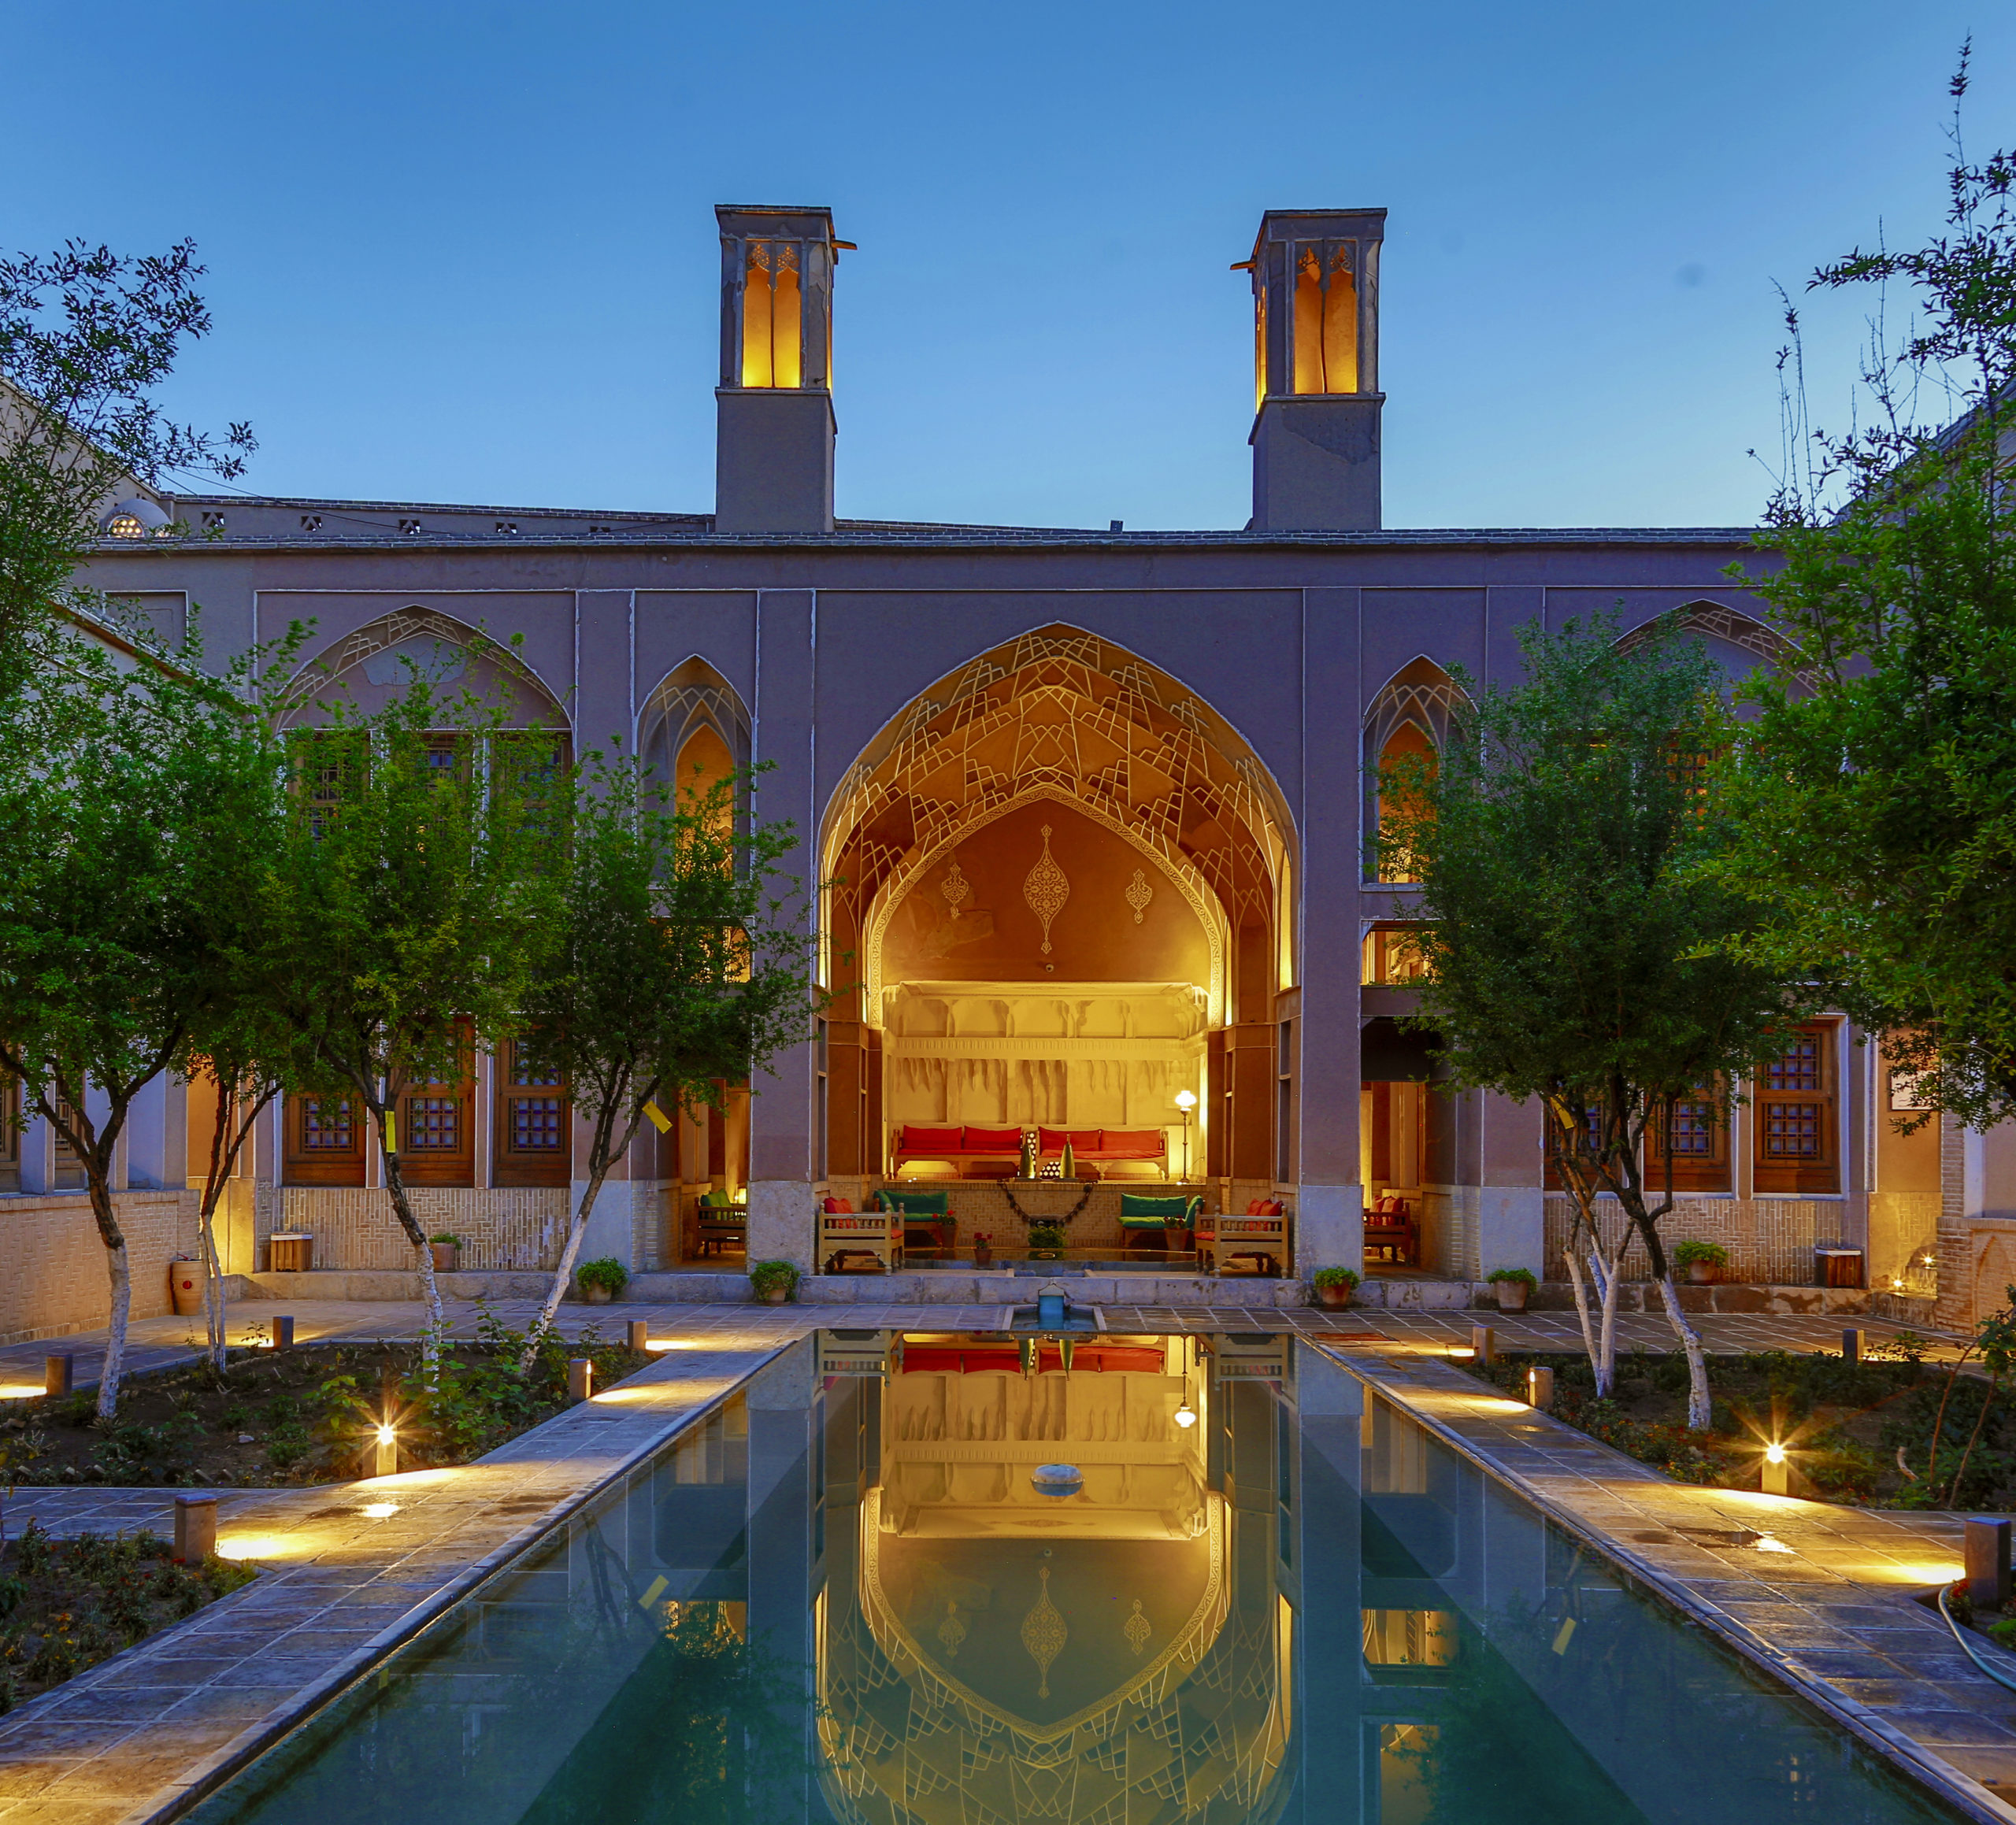 A Renaissance-style pool with ornate architectural elements